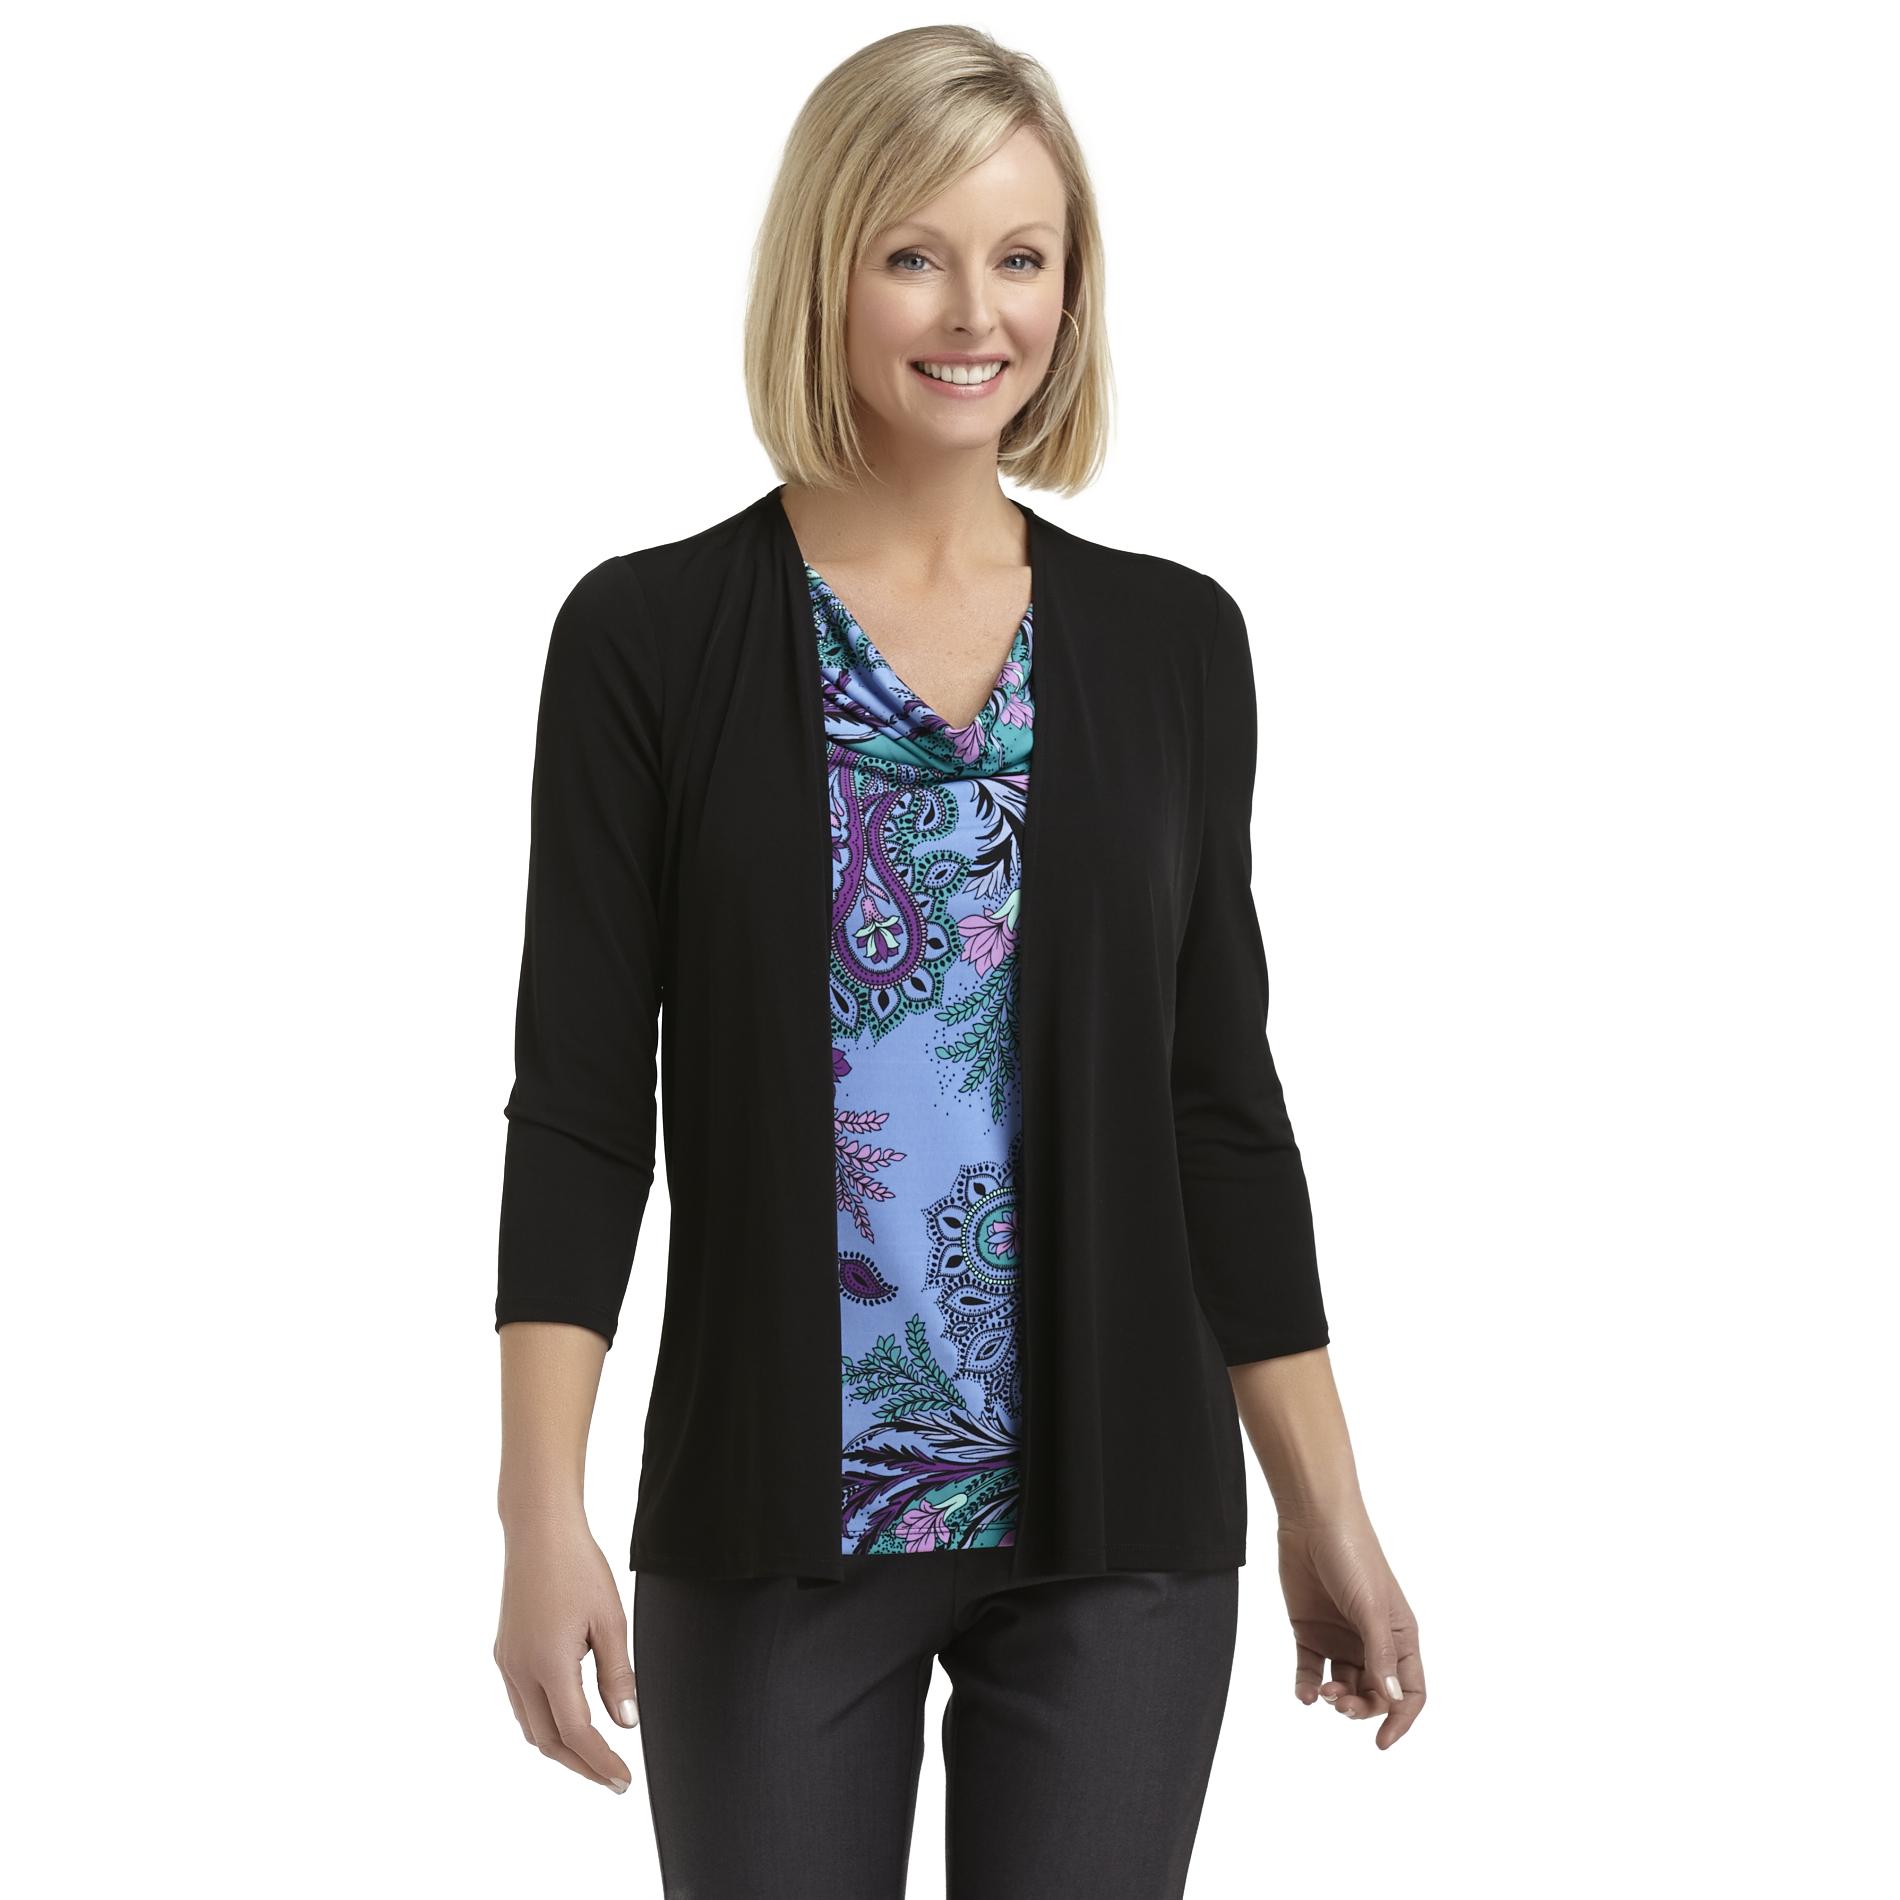 Jaclyn Smith Women's Layered-Look Top - Paisley